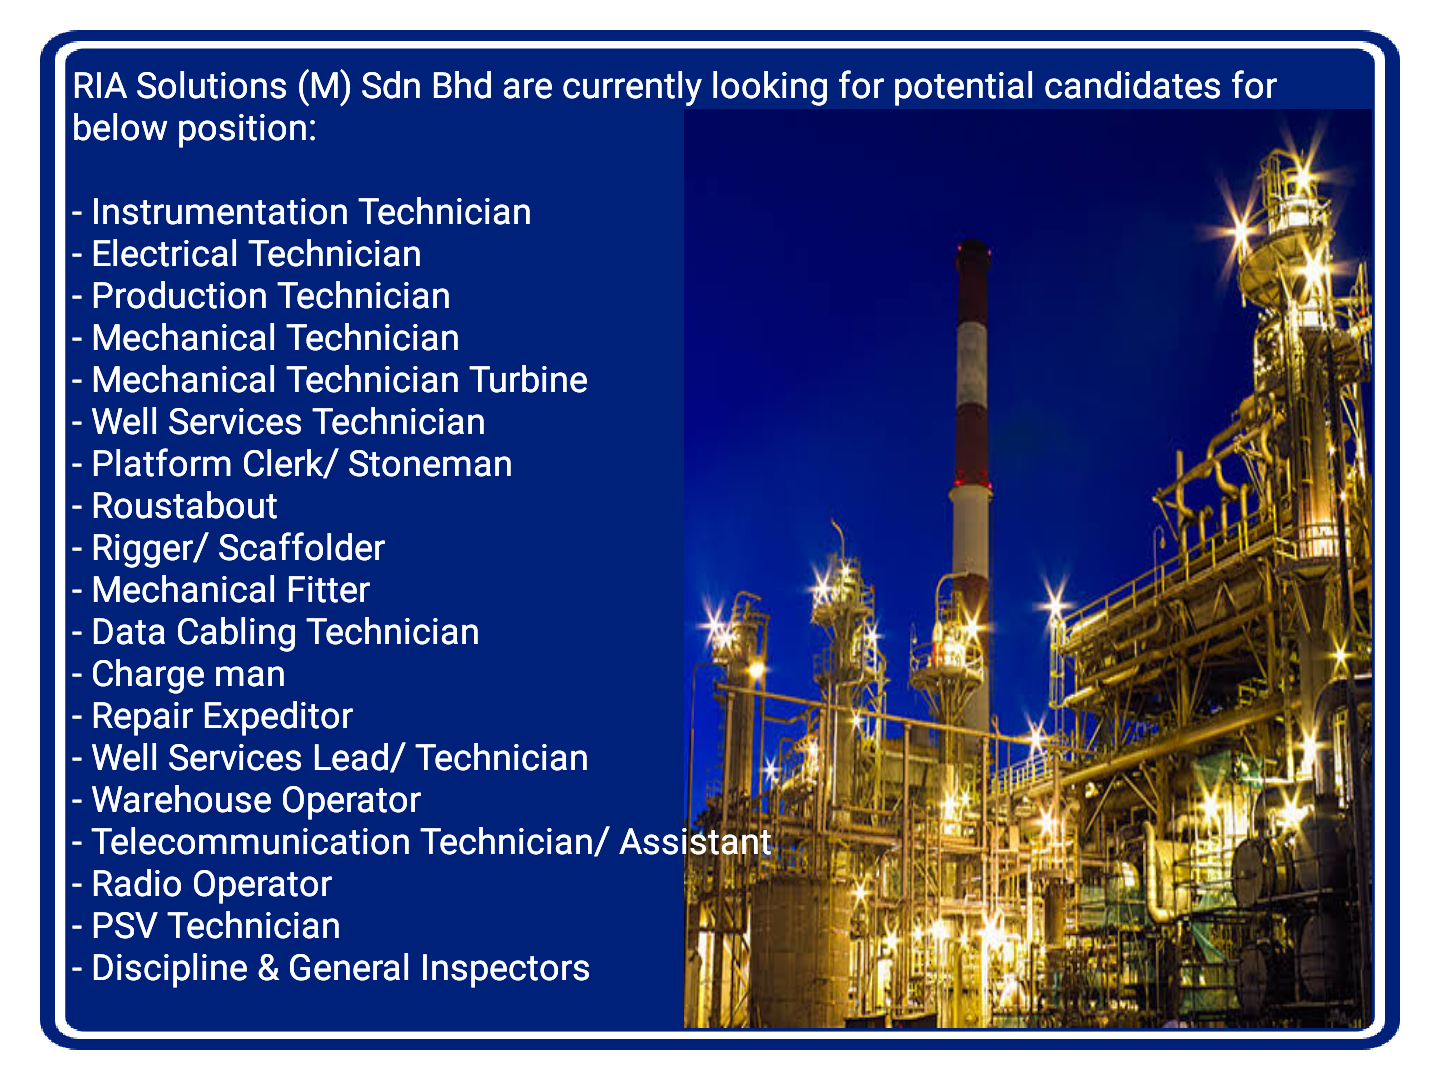 Instrument, Electrical, Mechanical, Production, Well Services & Data Cabling Technician Jobs